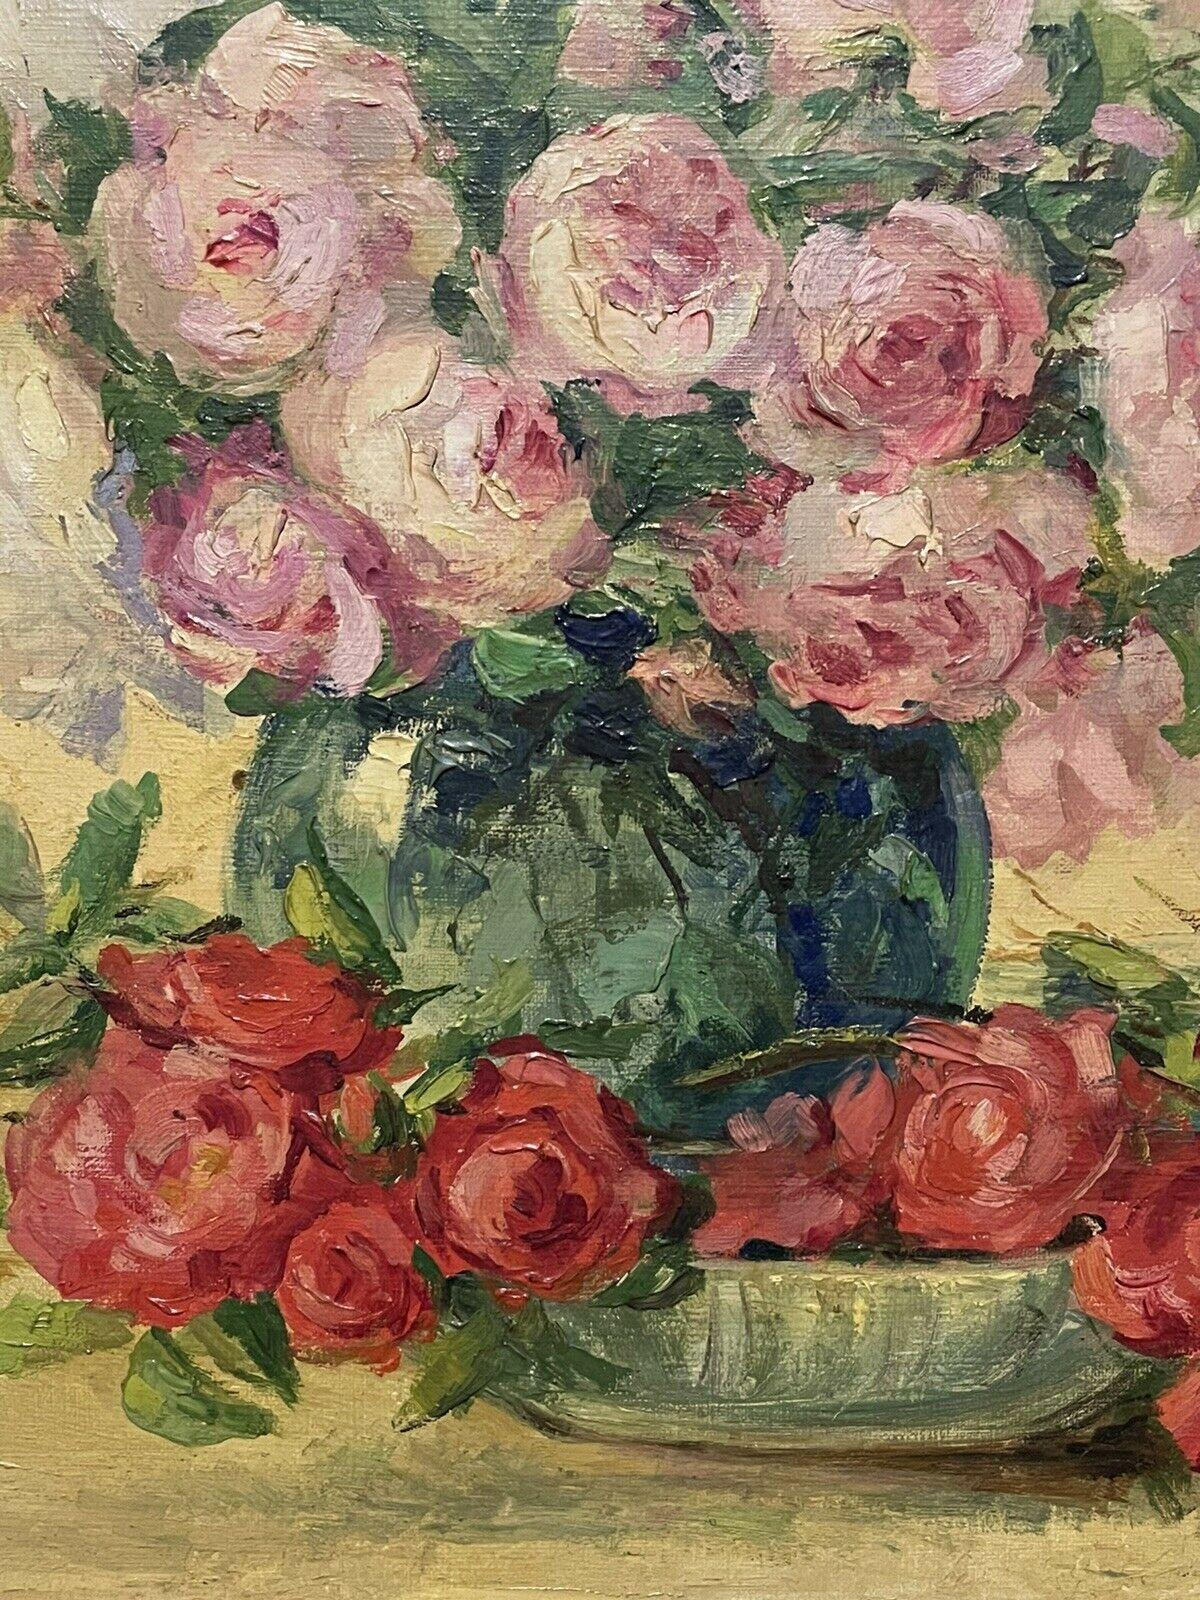 Artist/ School:  French School, mid 20th century, indistinctly signed

Title: vintage still life of roses in a bowl, in original 'shabby chic' frame

Medium:  oil painting on board, framed

Size:       frame: 19.25 x 22.25 inches
           